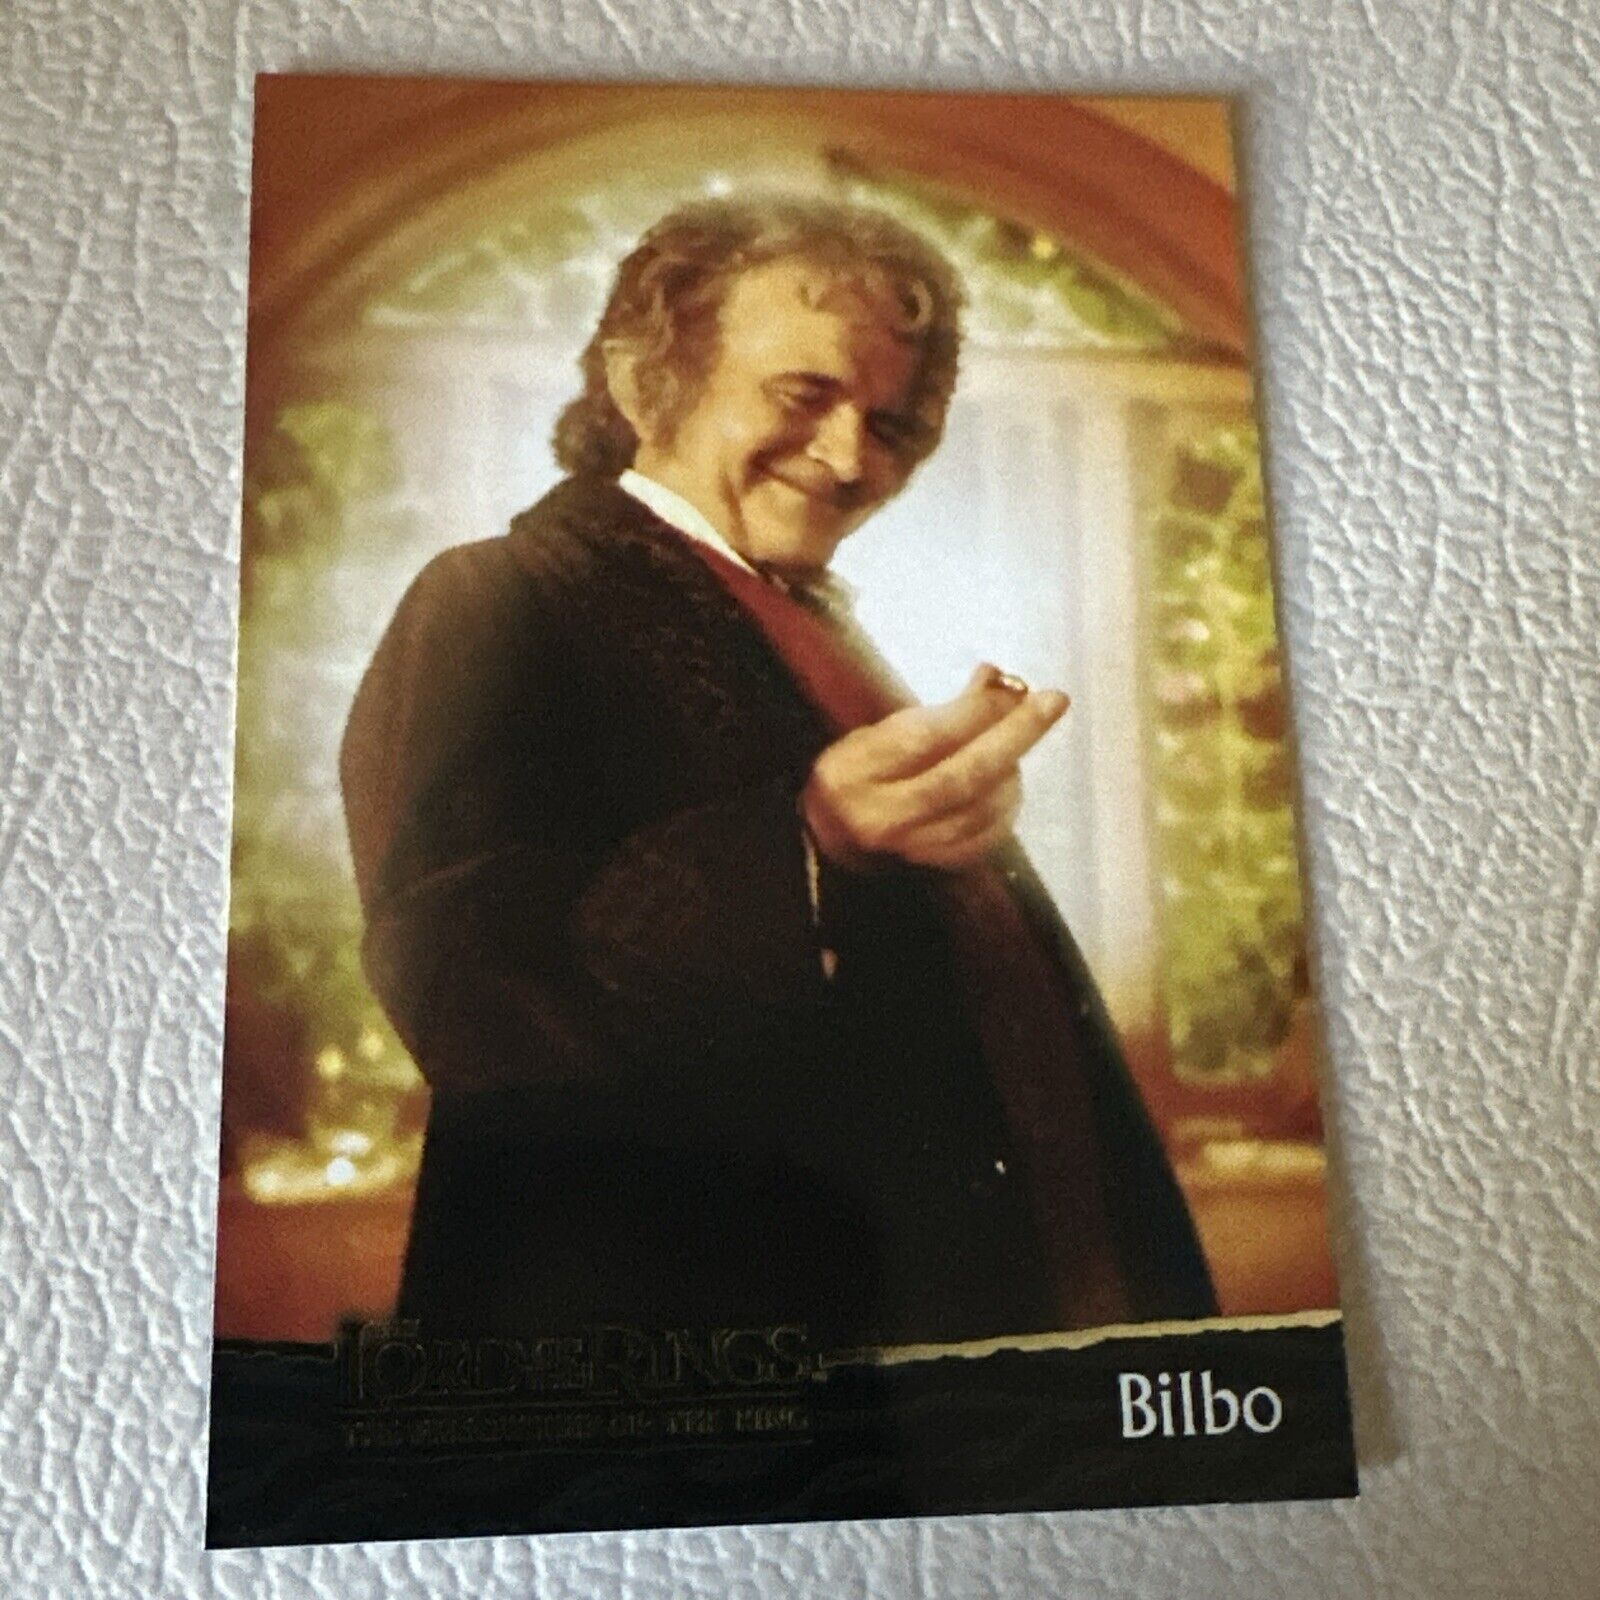 2001 Topps The Lord of the Rings: The Fellowship of the Ring Bilbo #3